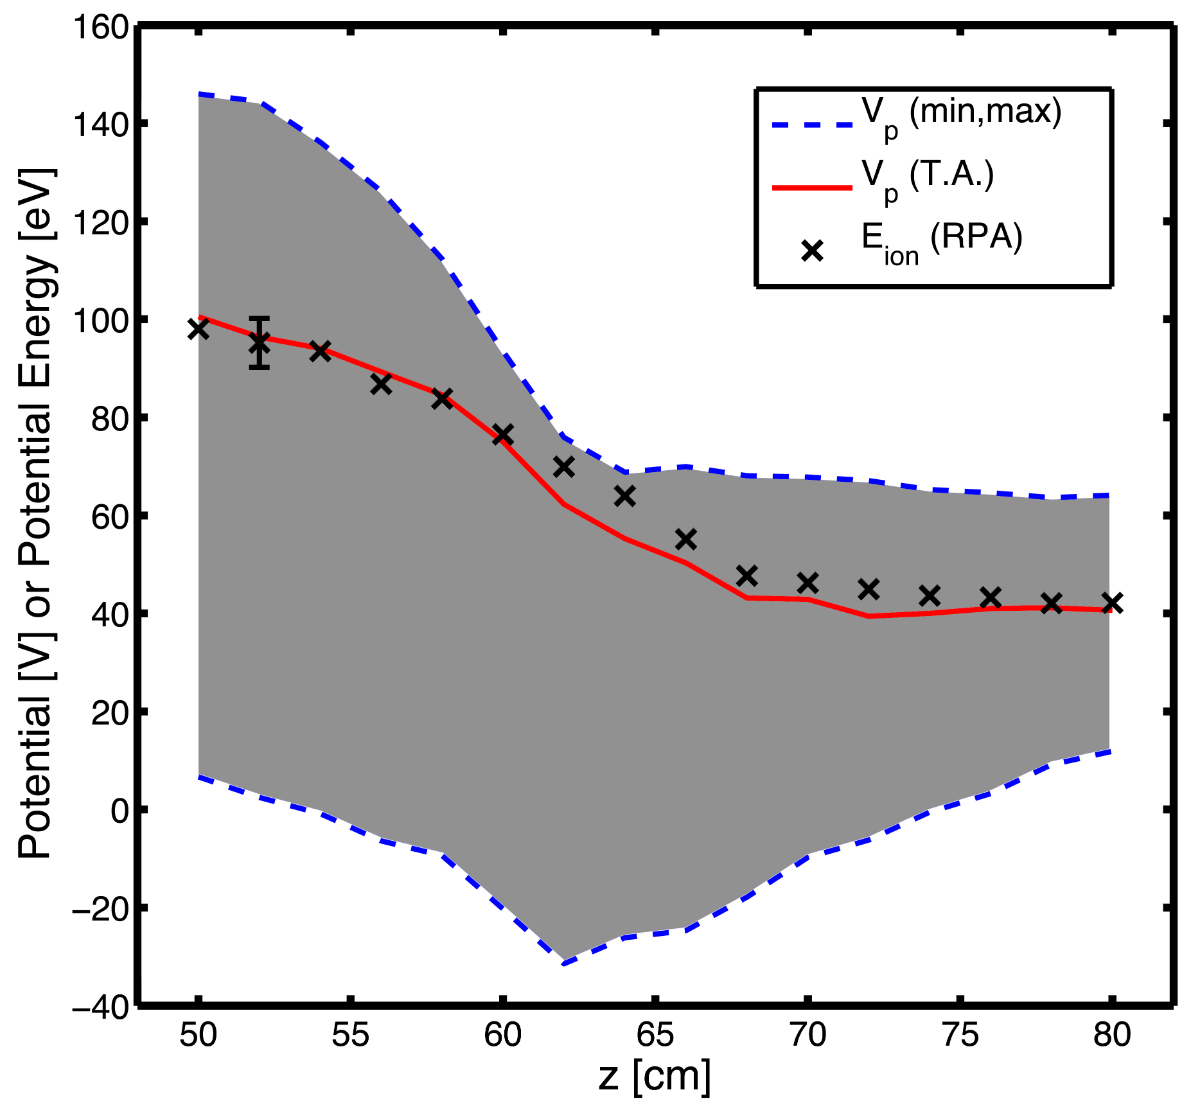 Max, Min and Time-Averaged Plasma Potential